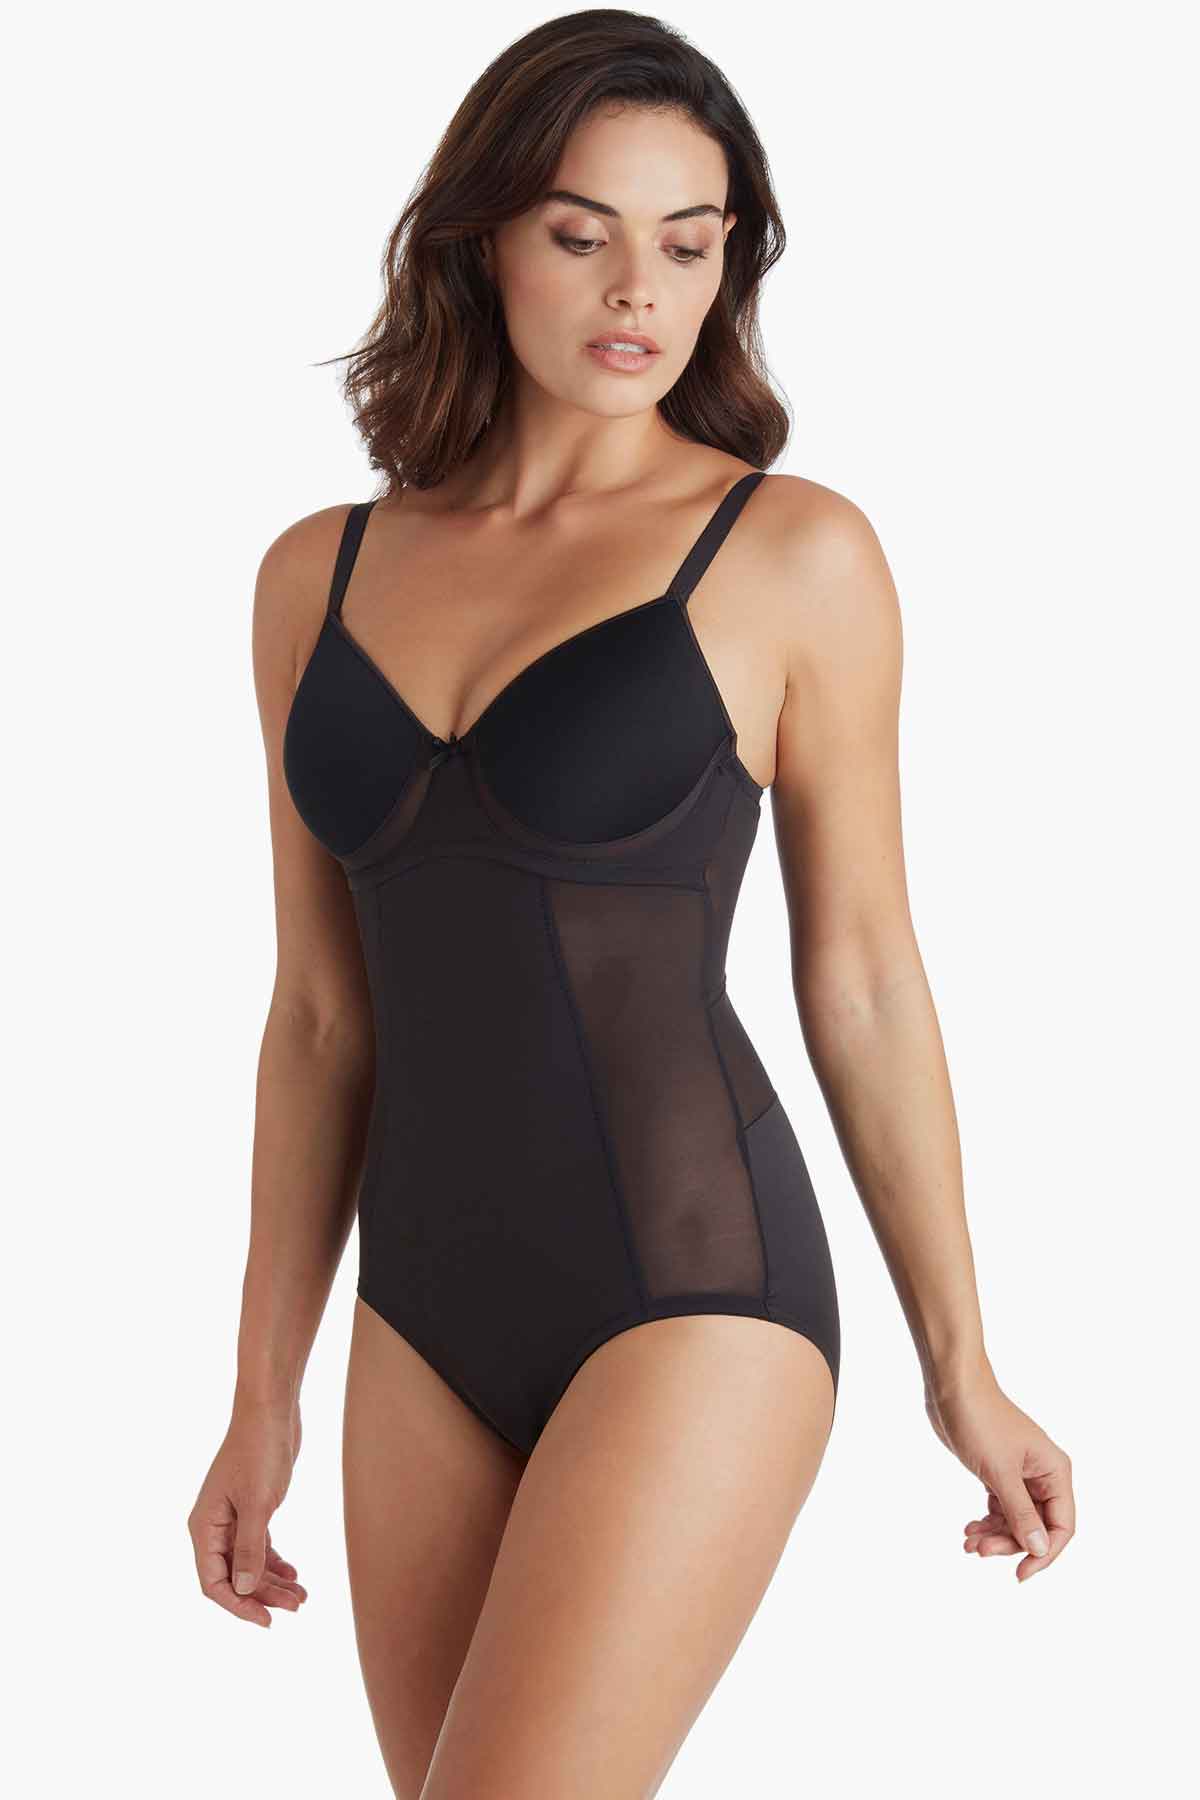 Miraclesuit Sexy Sheer Extra Firm Control Rear Lifting Boyshort